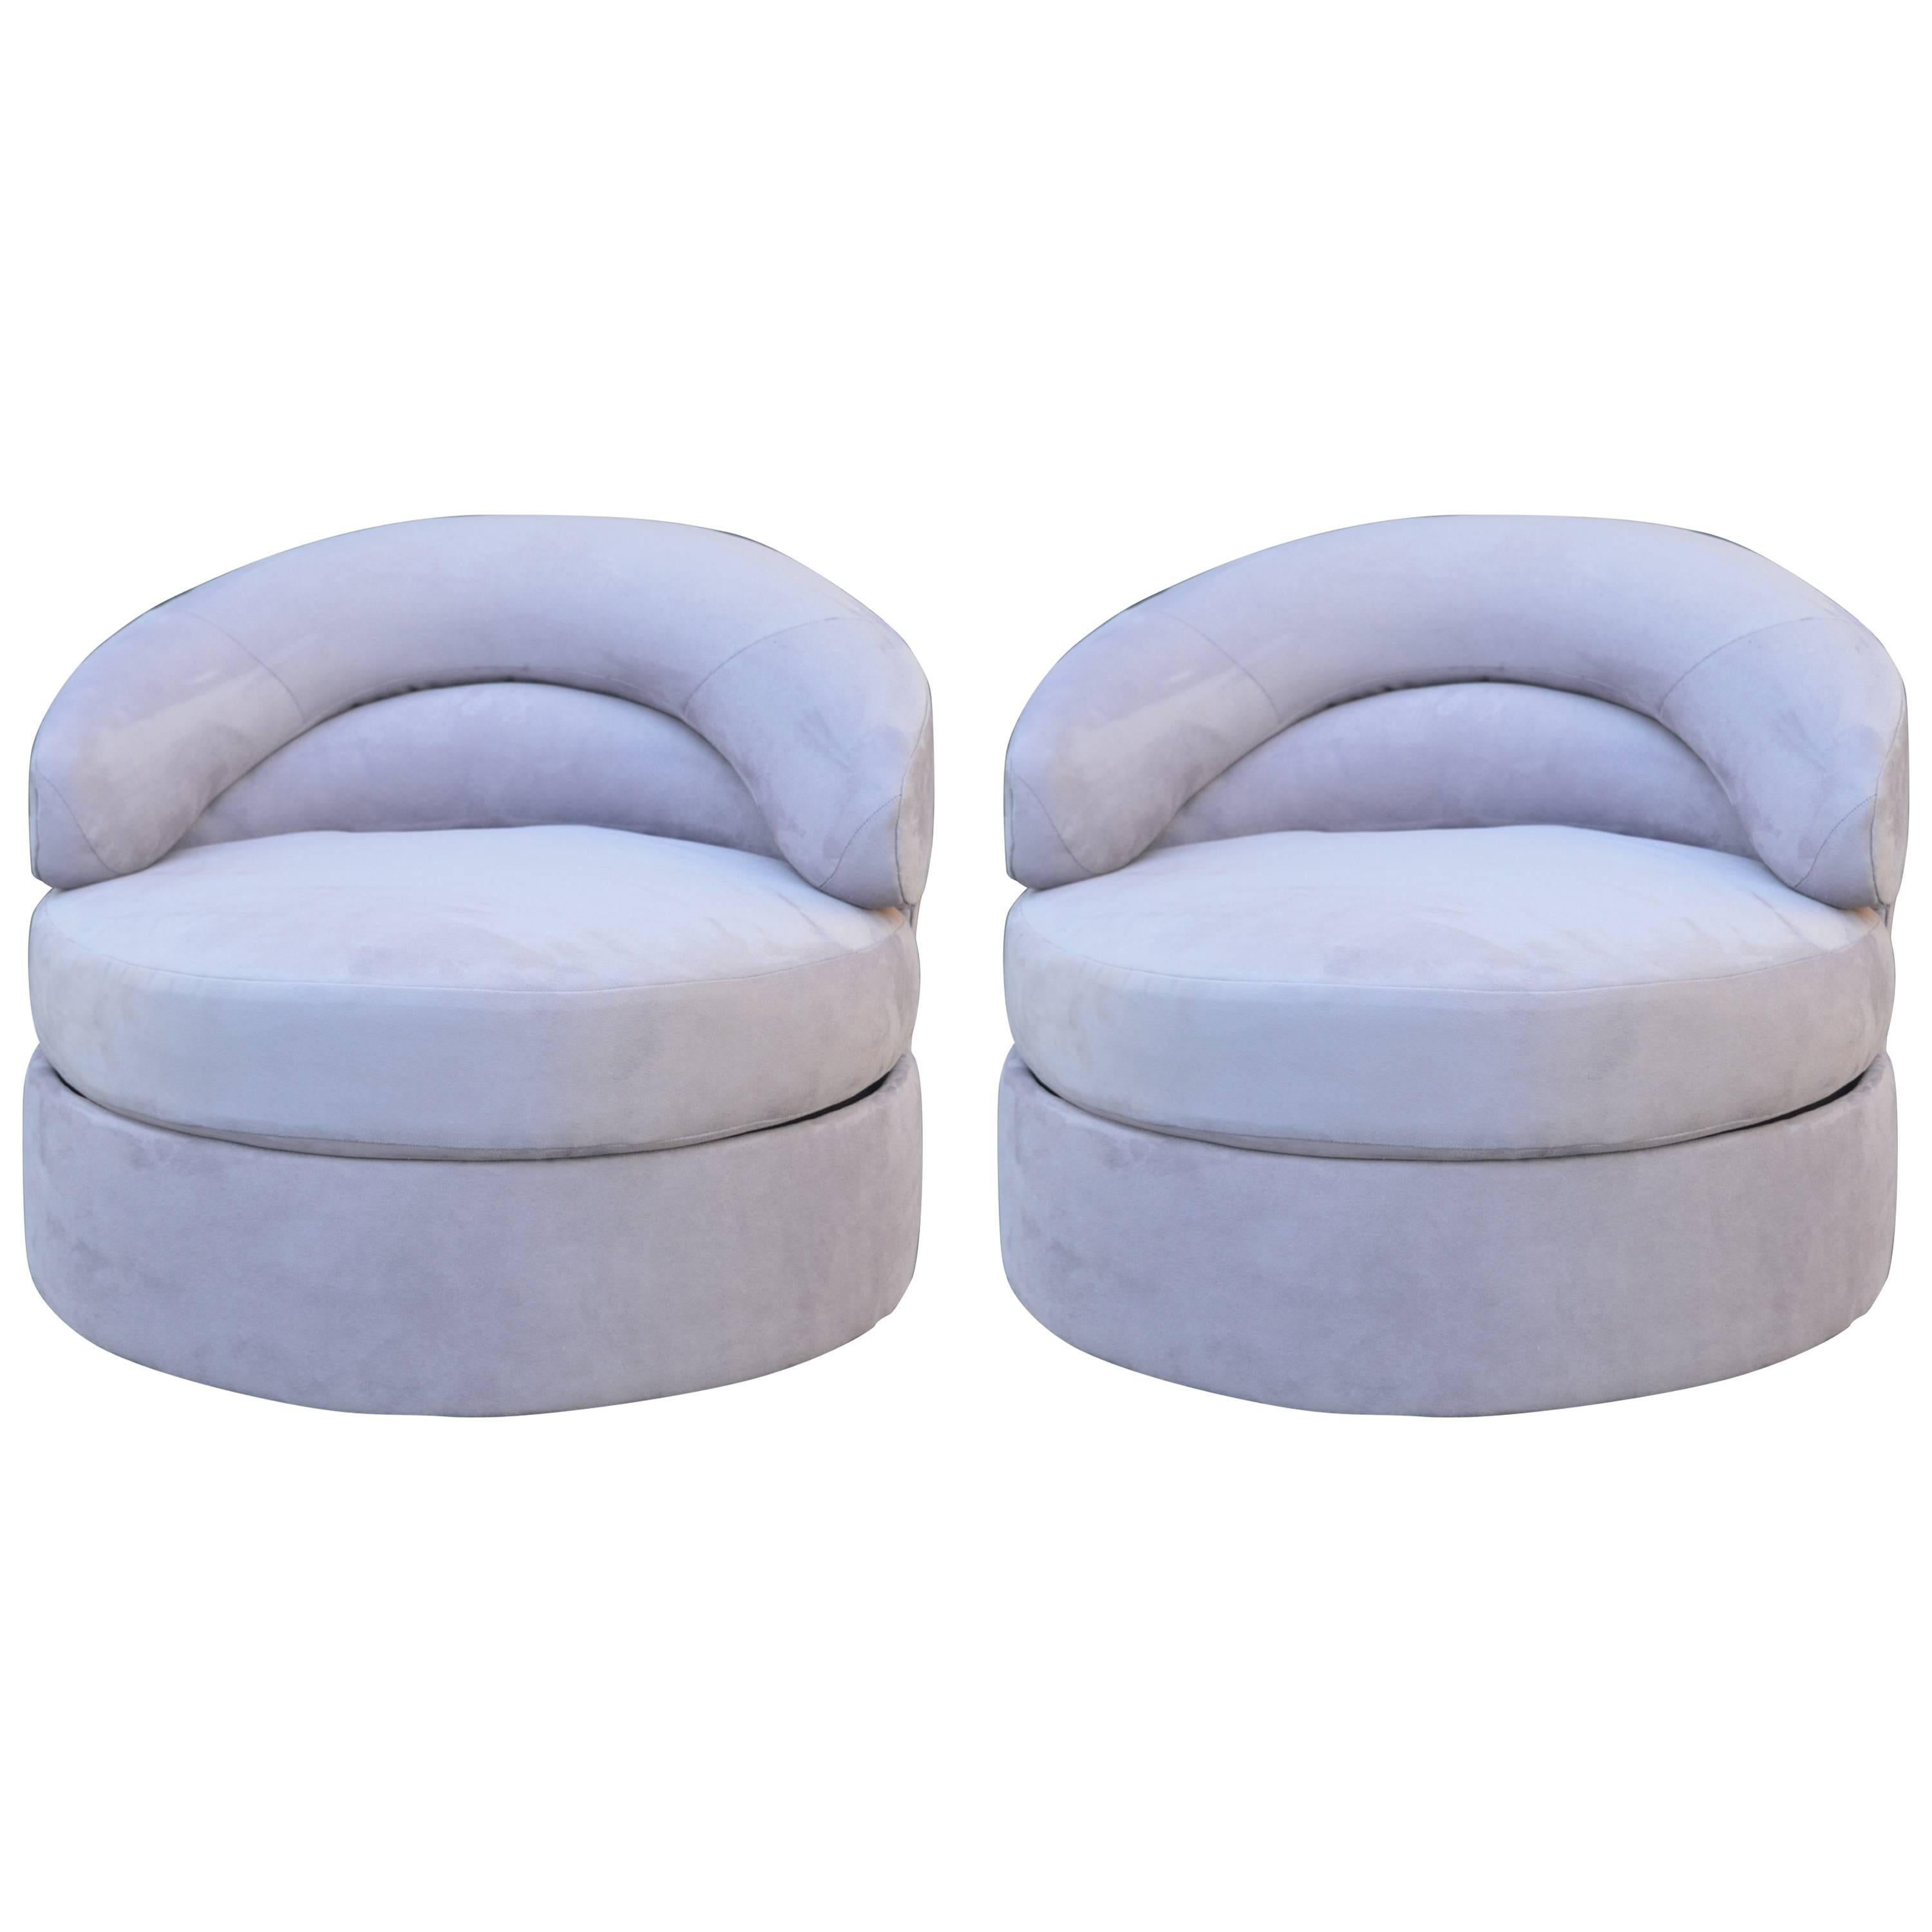 Pair of Directional Suede Swivel Chairs